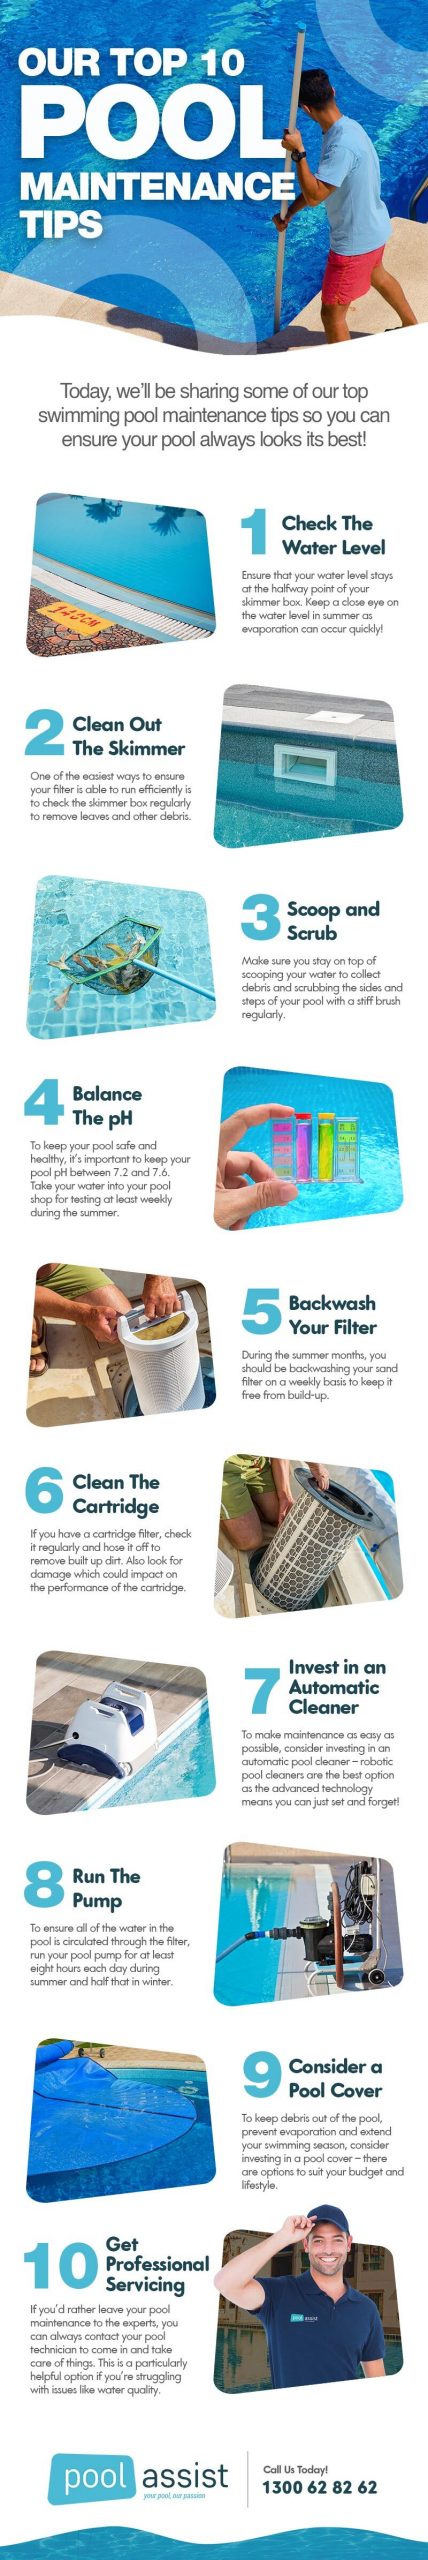 Our Top 10 Pool Maintenance Tips